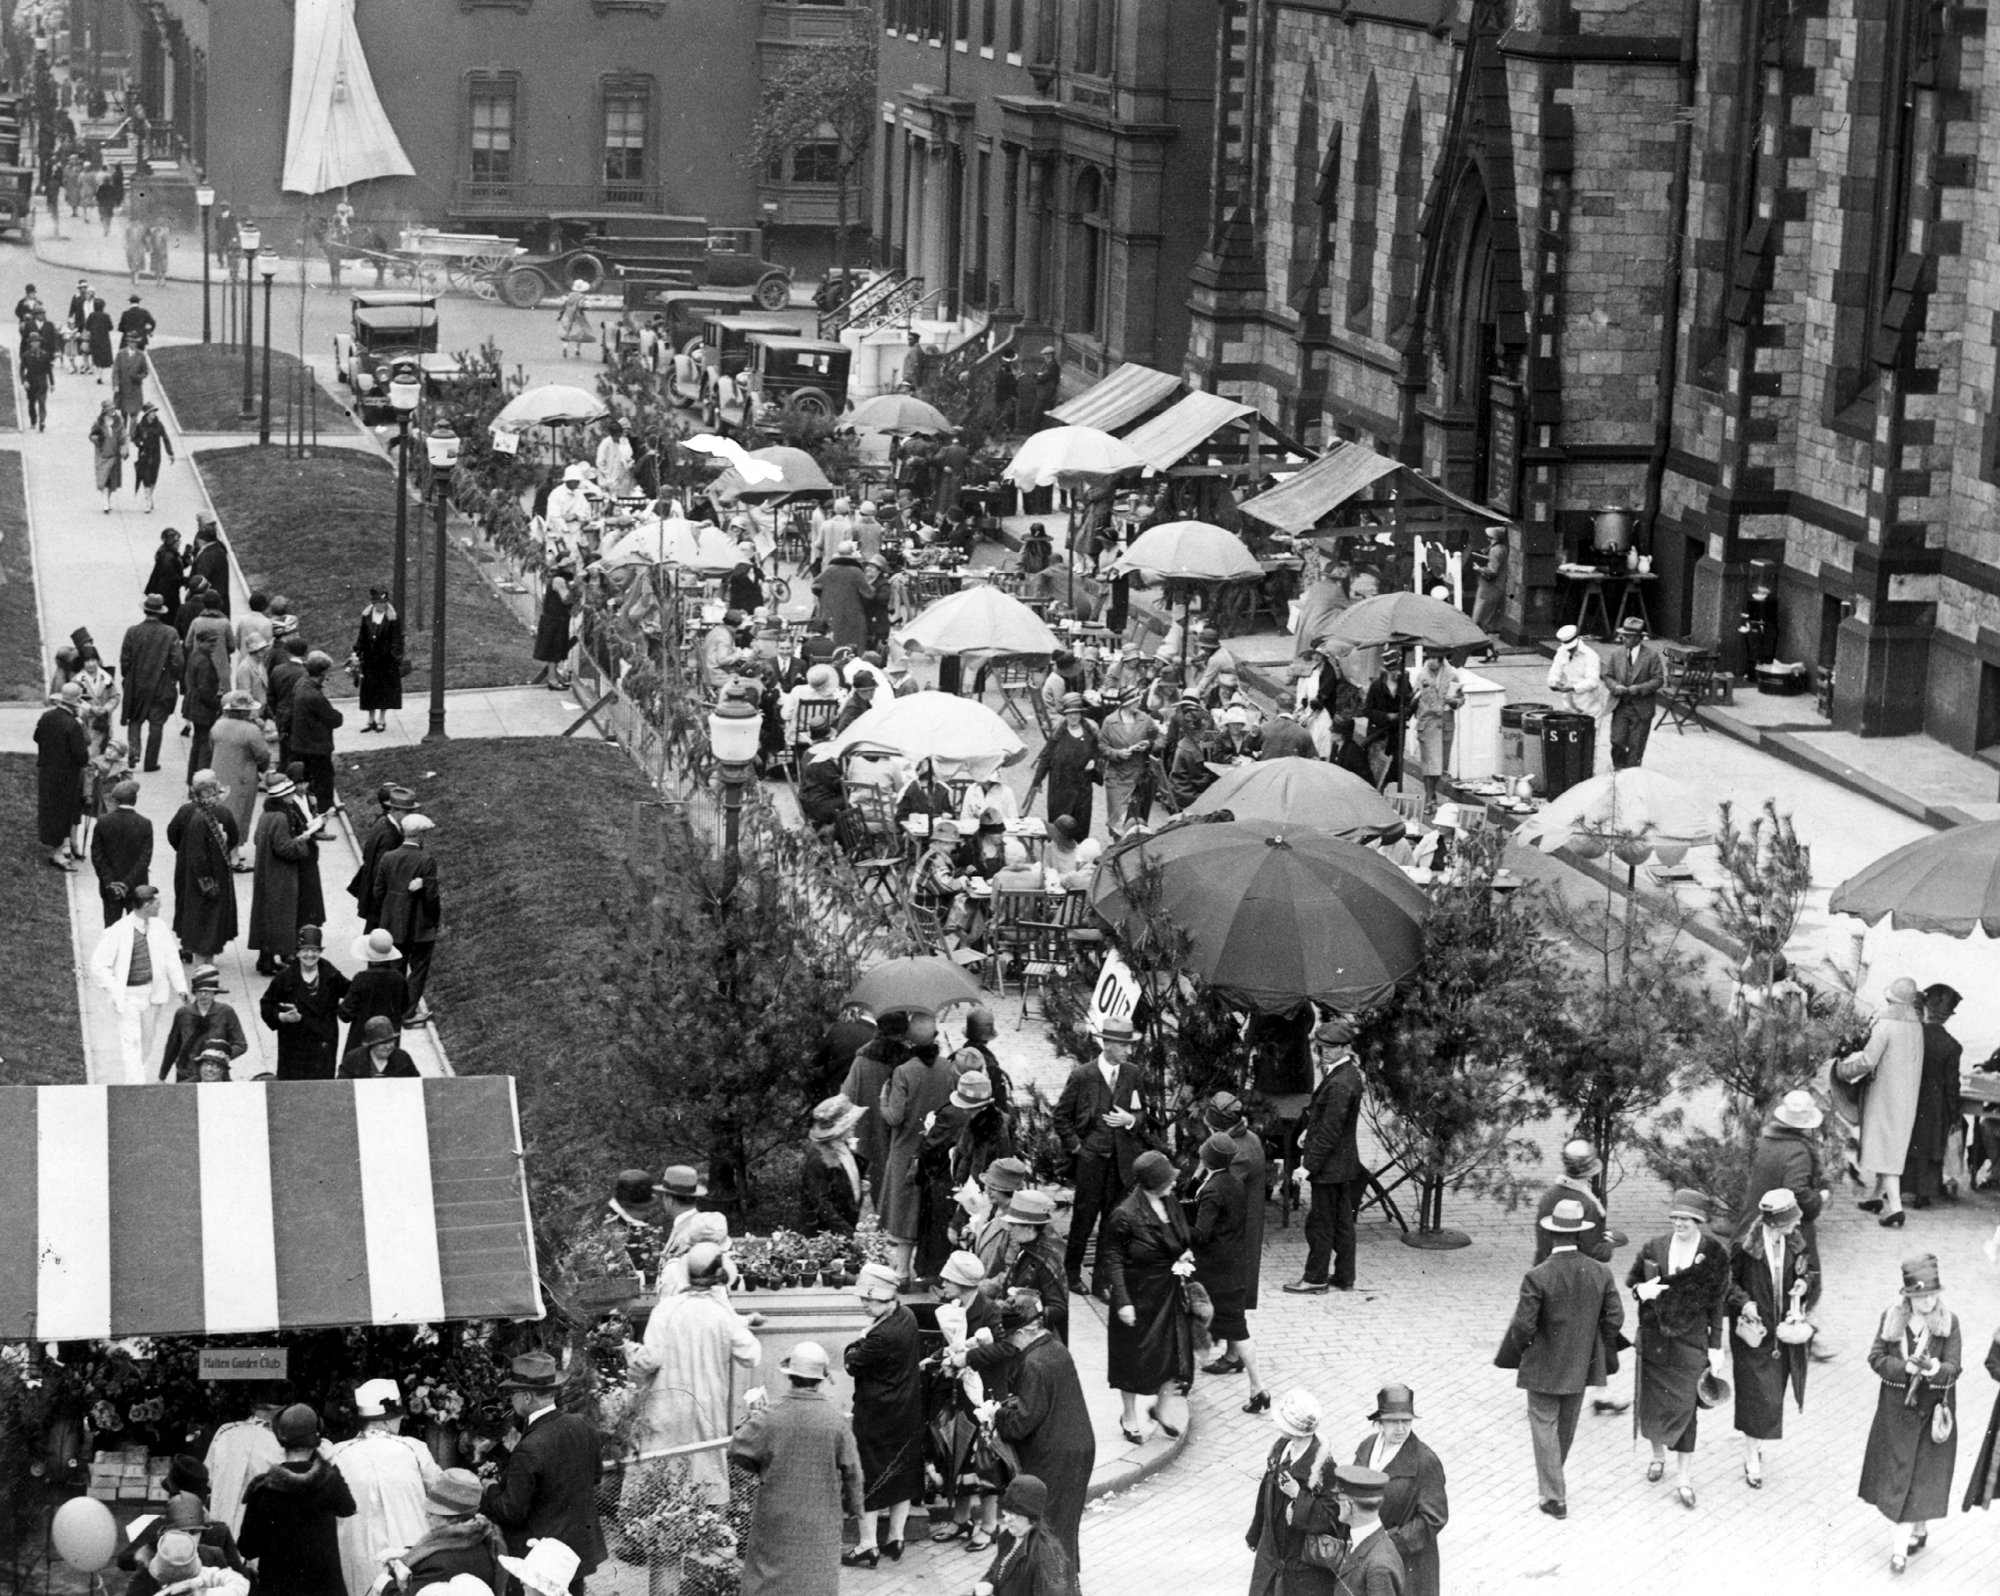 May 22, 1927-- Tea garden at the Flower Mart. Photo by unknown/file photo (scanned 05/08/02)